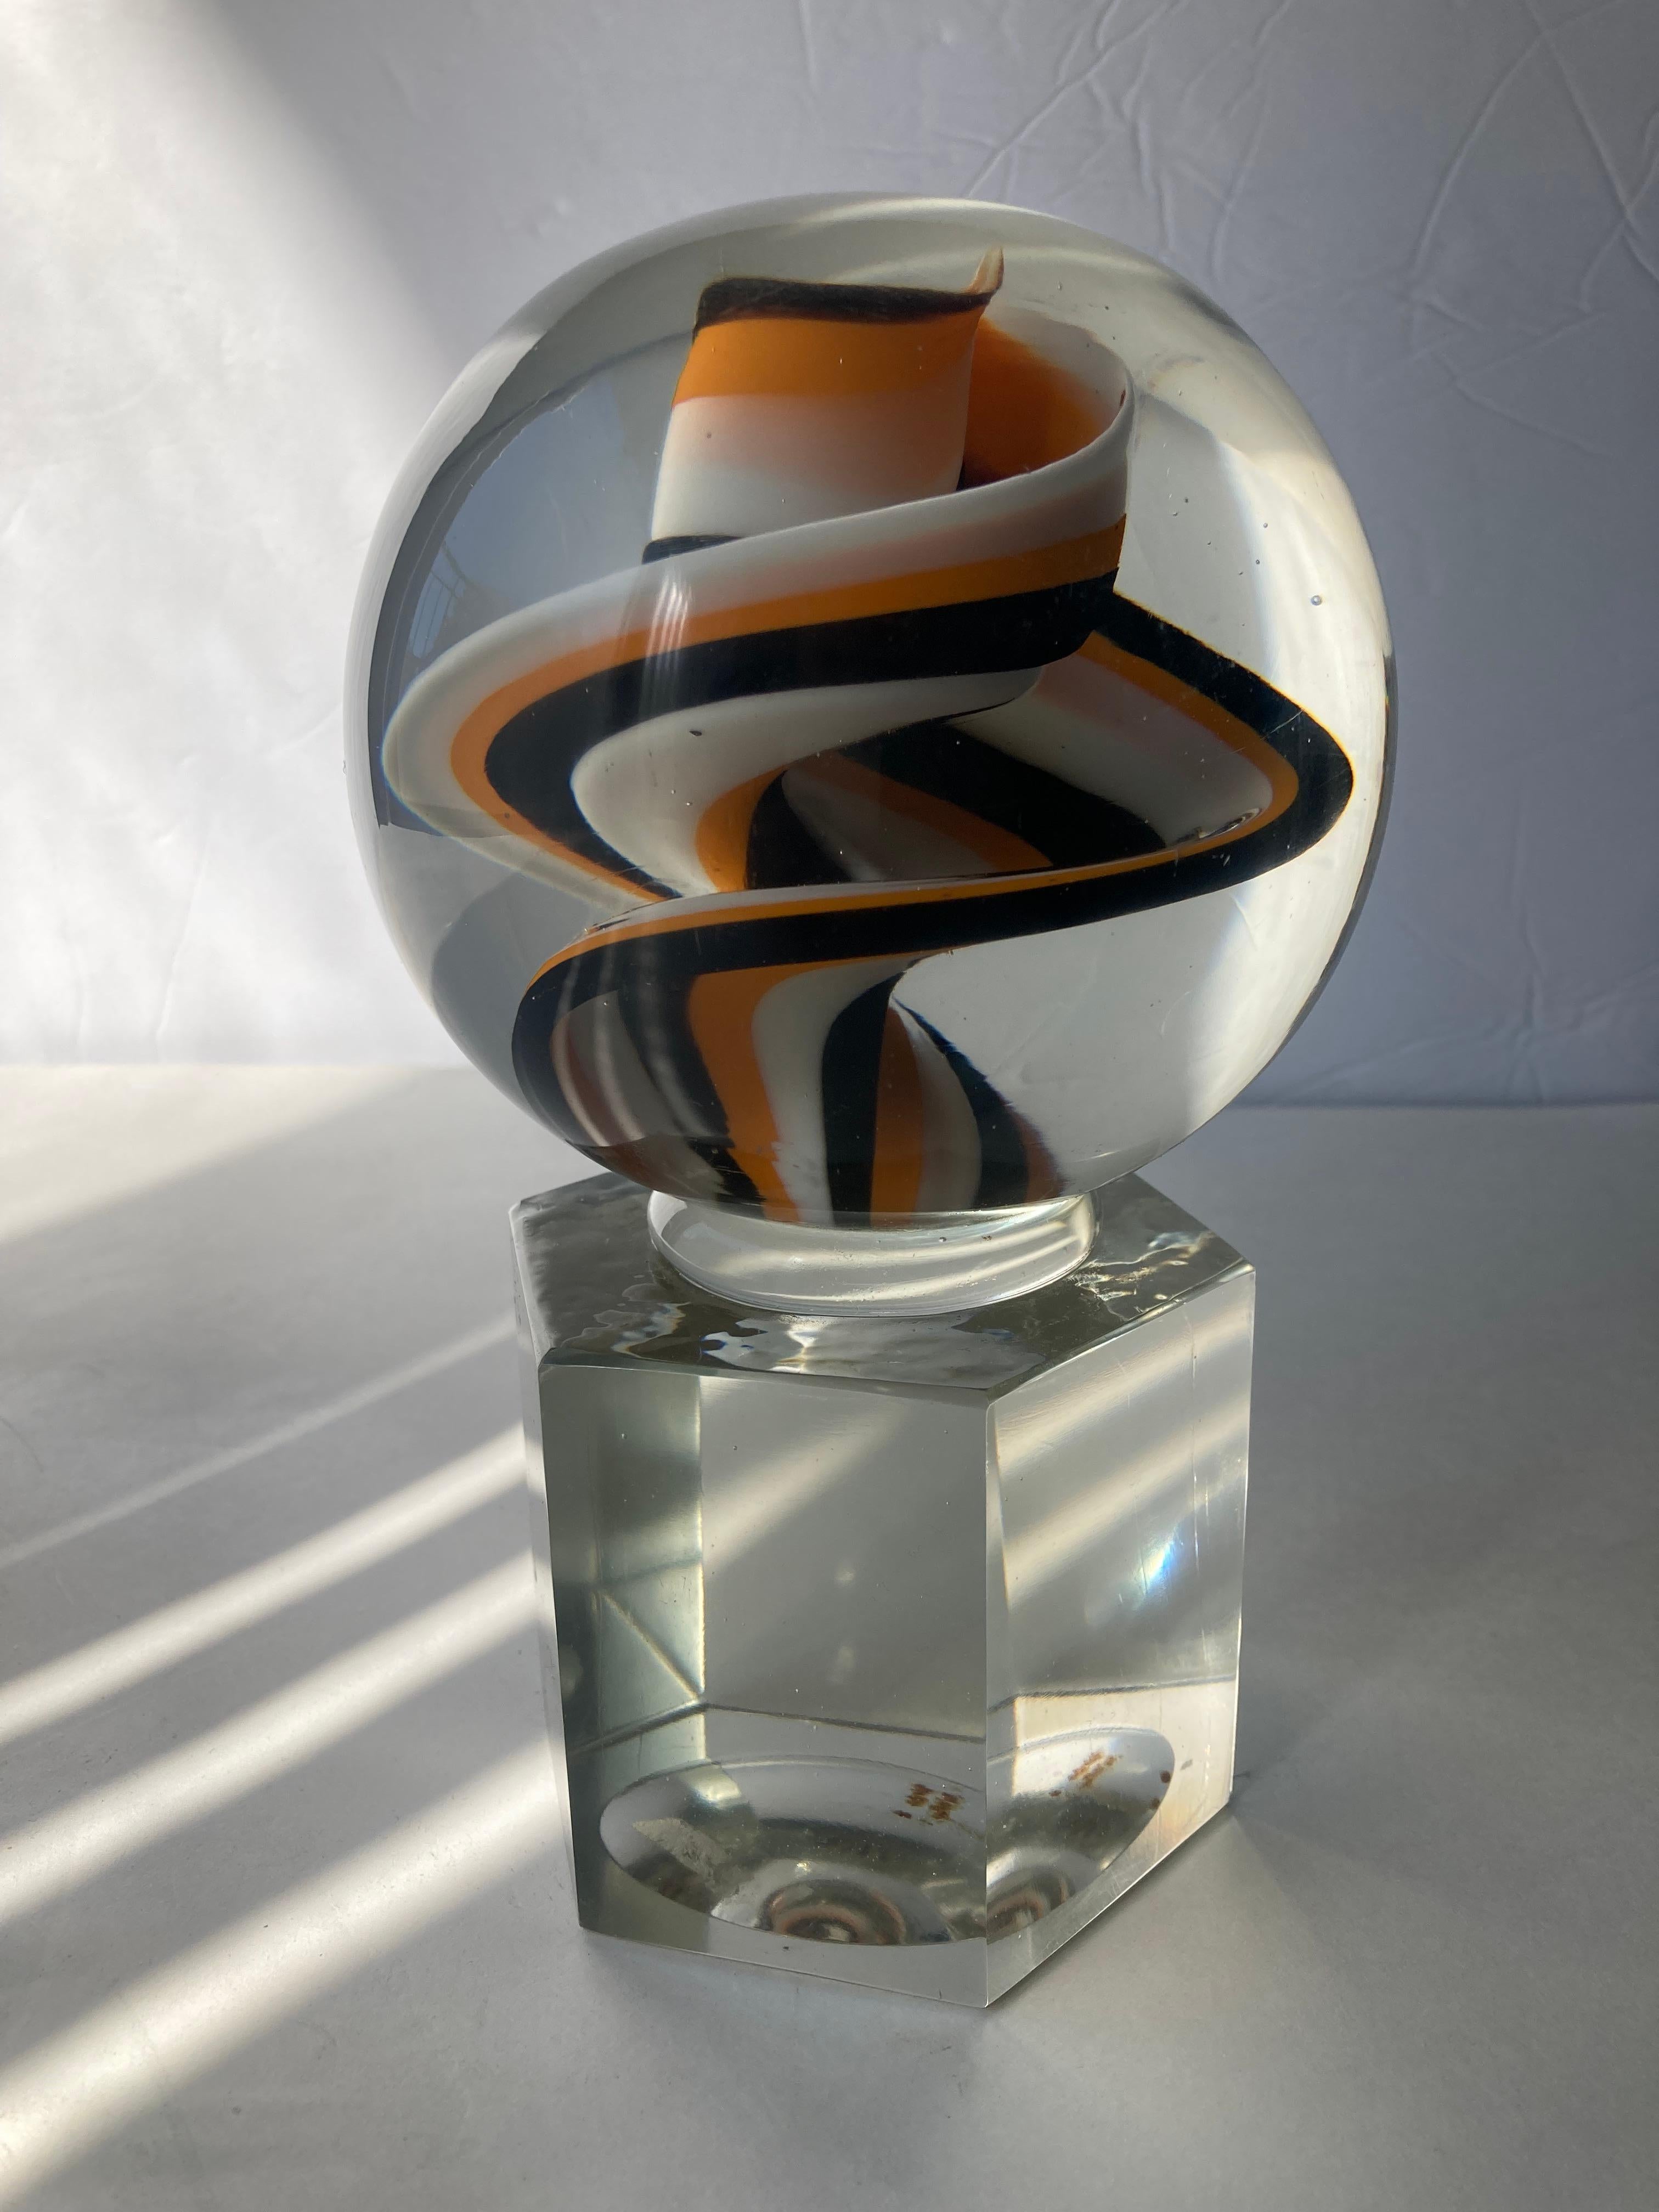 Beautiful Venini paperweight / abstract sculpture with a traditional swirl ribbon design. This is signed and is shown with circle marker in last picture, very faded, but is (Venini Italia) in the bottom. Shows a light ding in one of facet hexagon